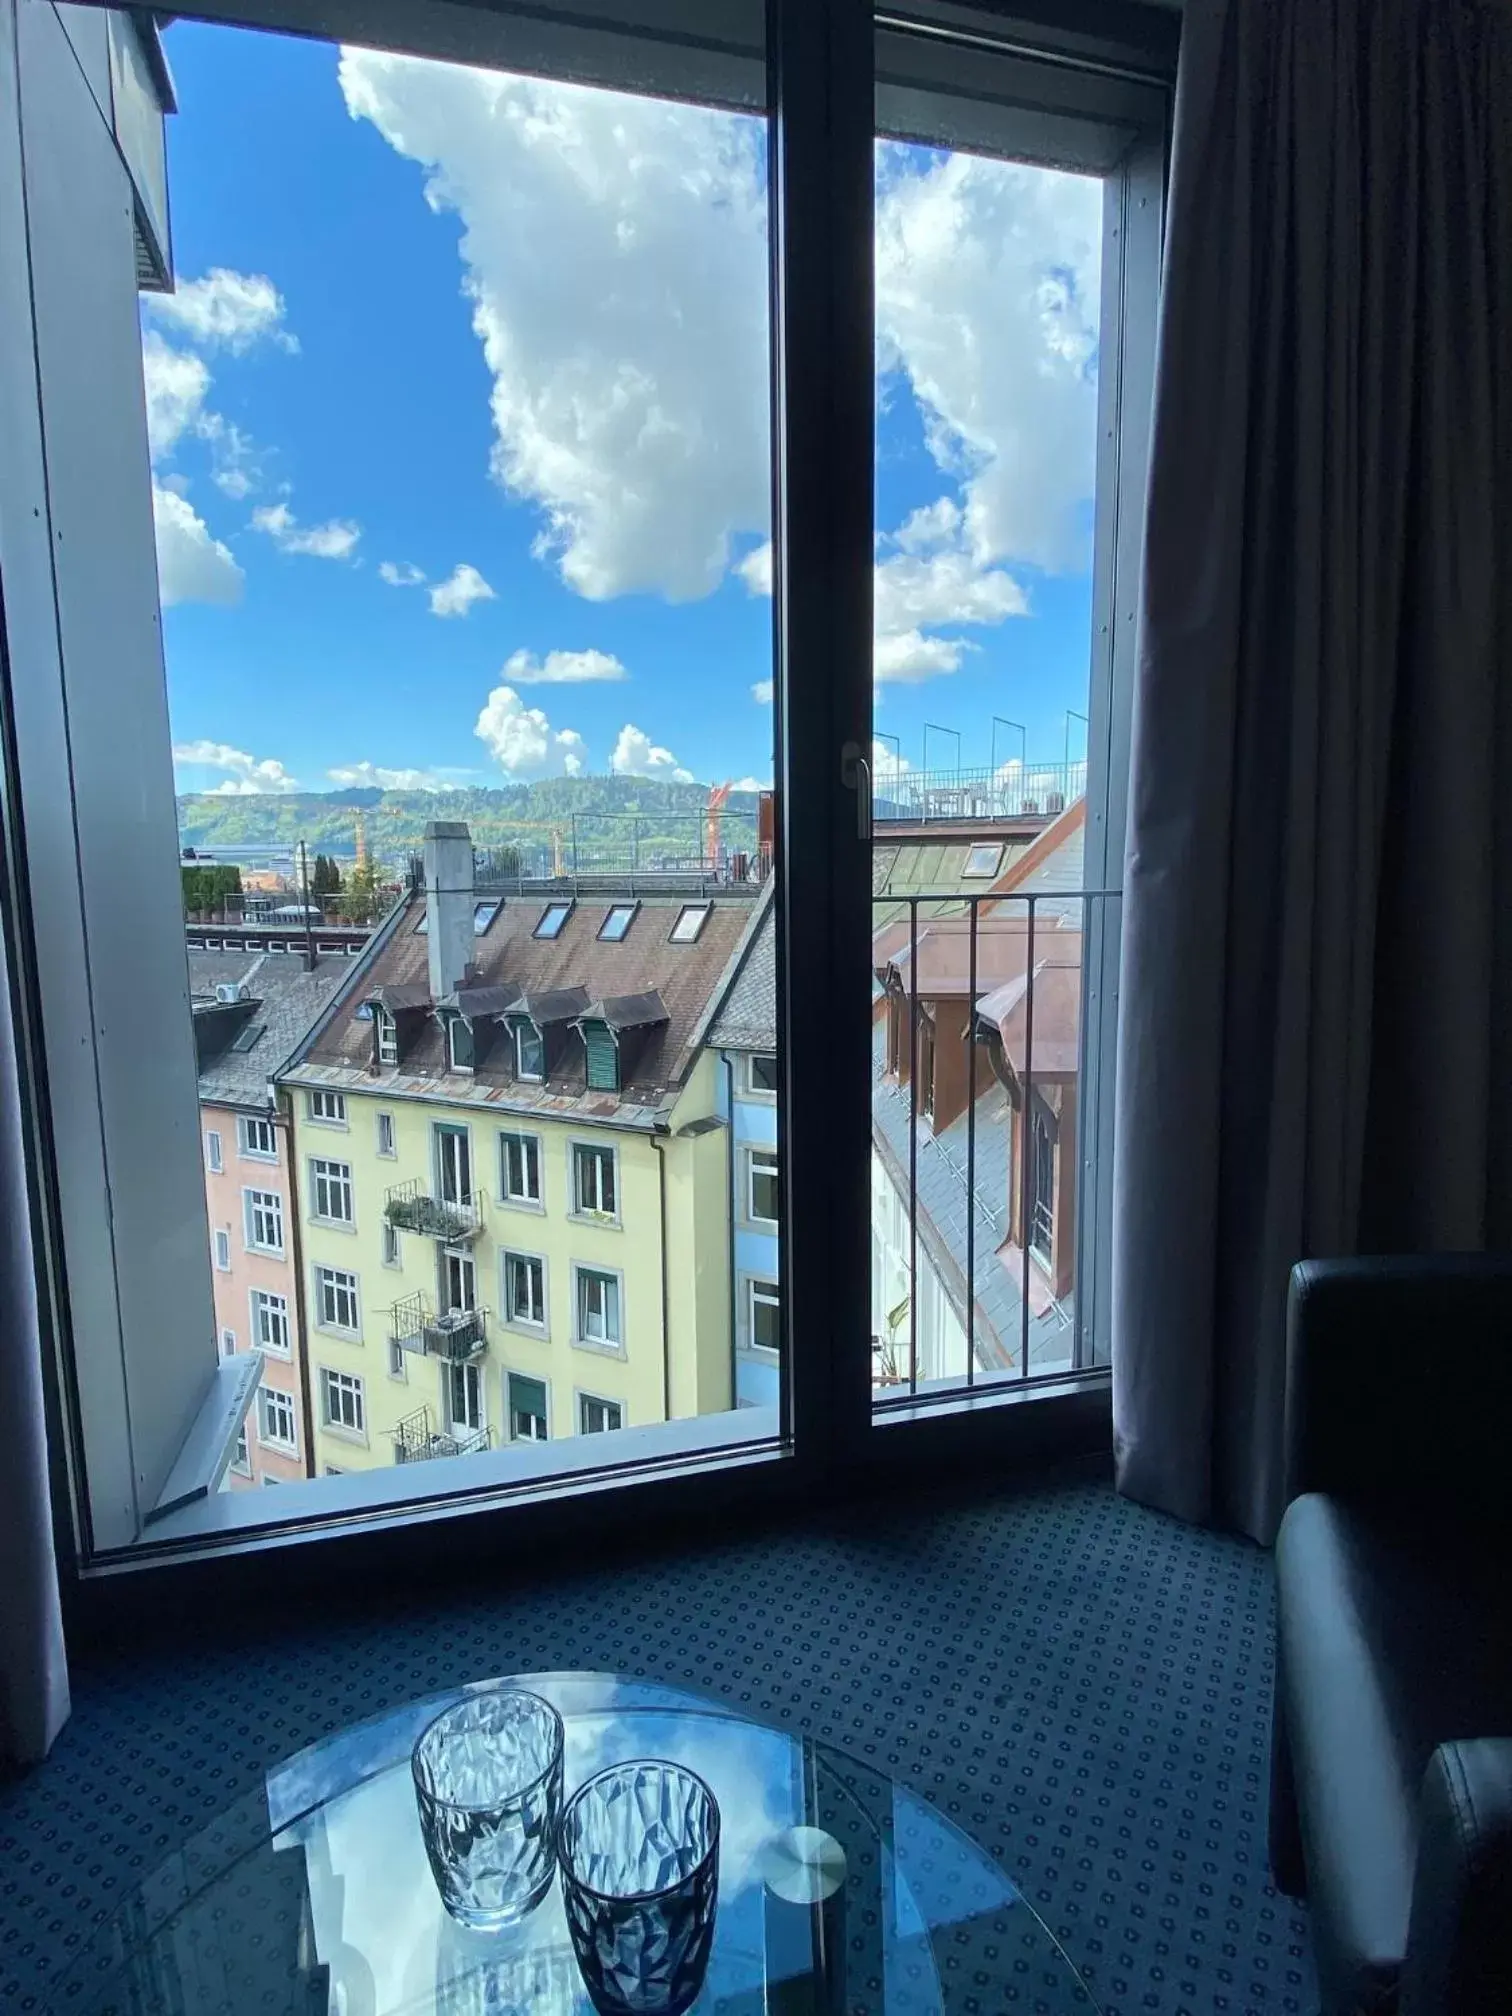 View (from property/room) in Royal Hotel Zurich